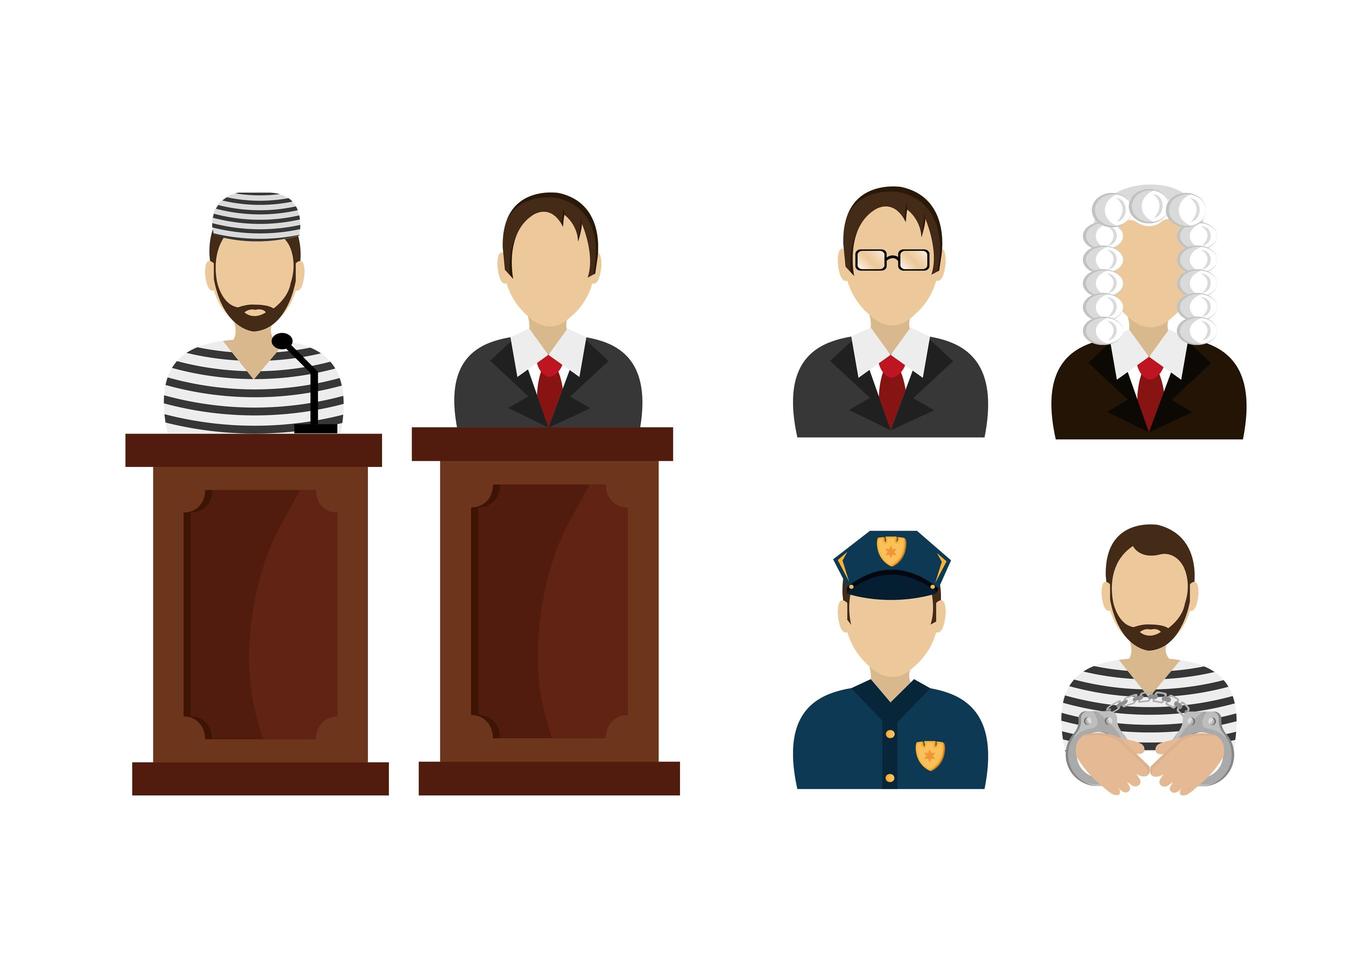 set of legal law and justice icons vector